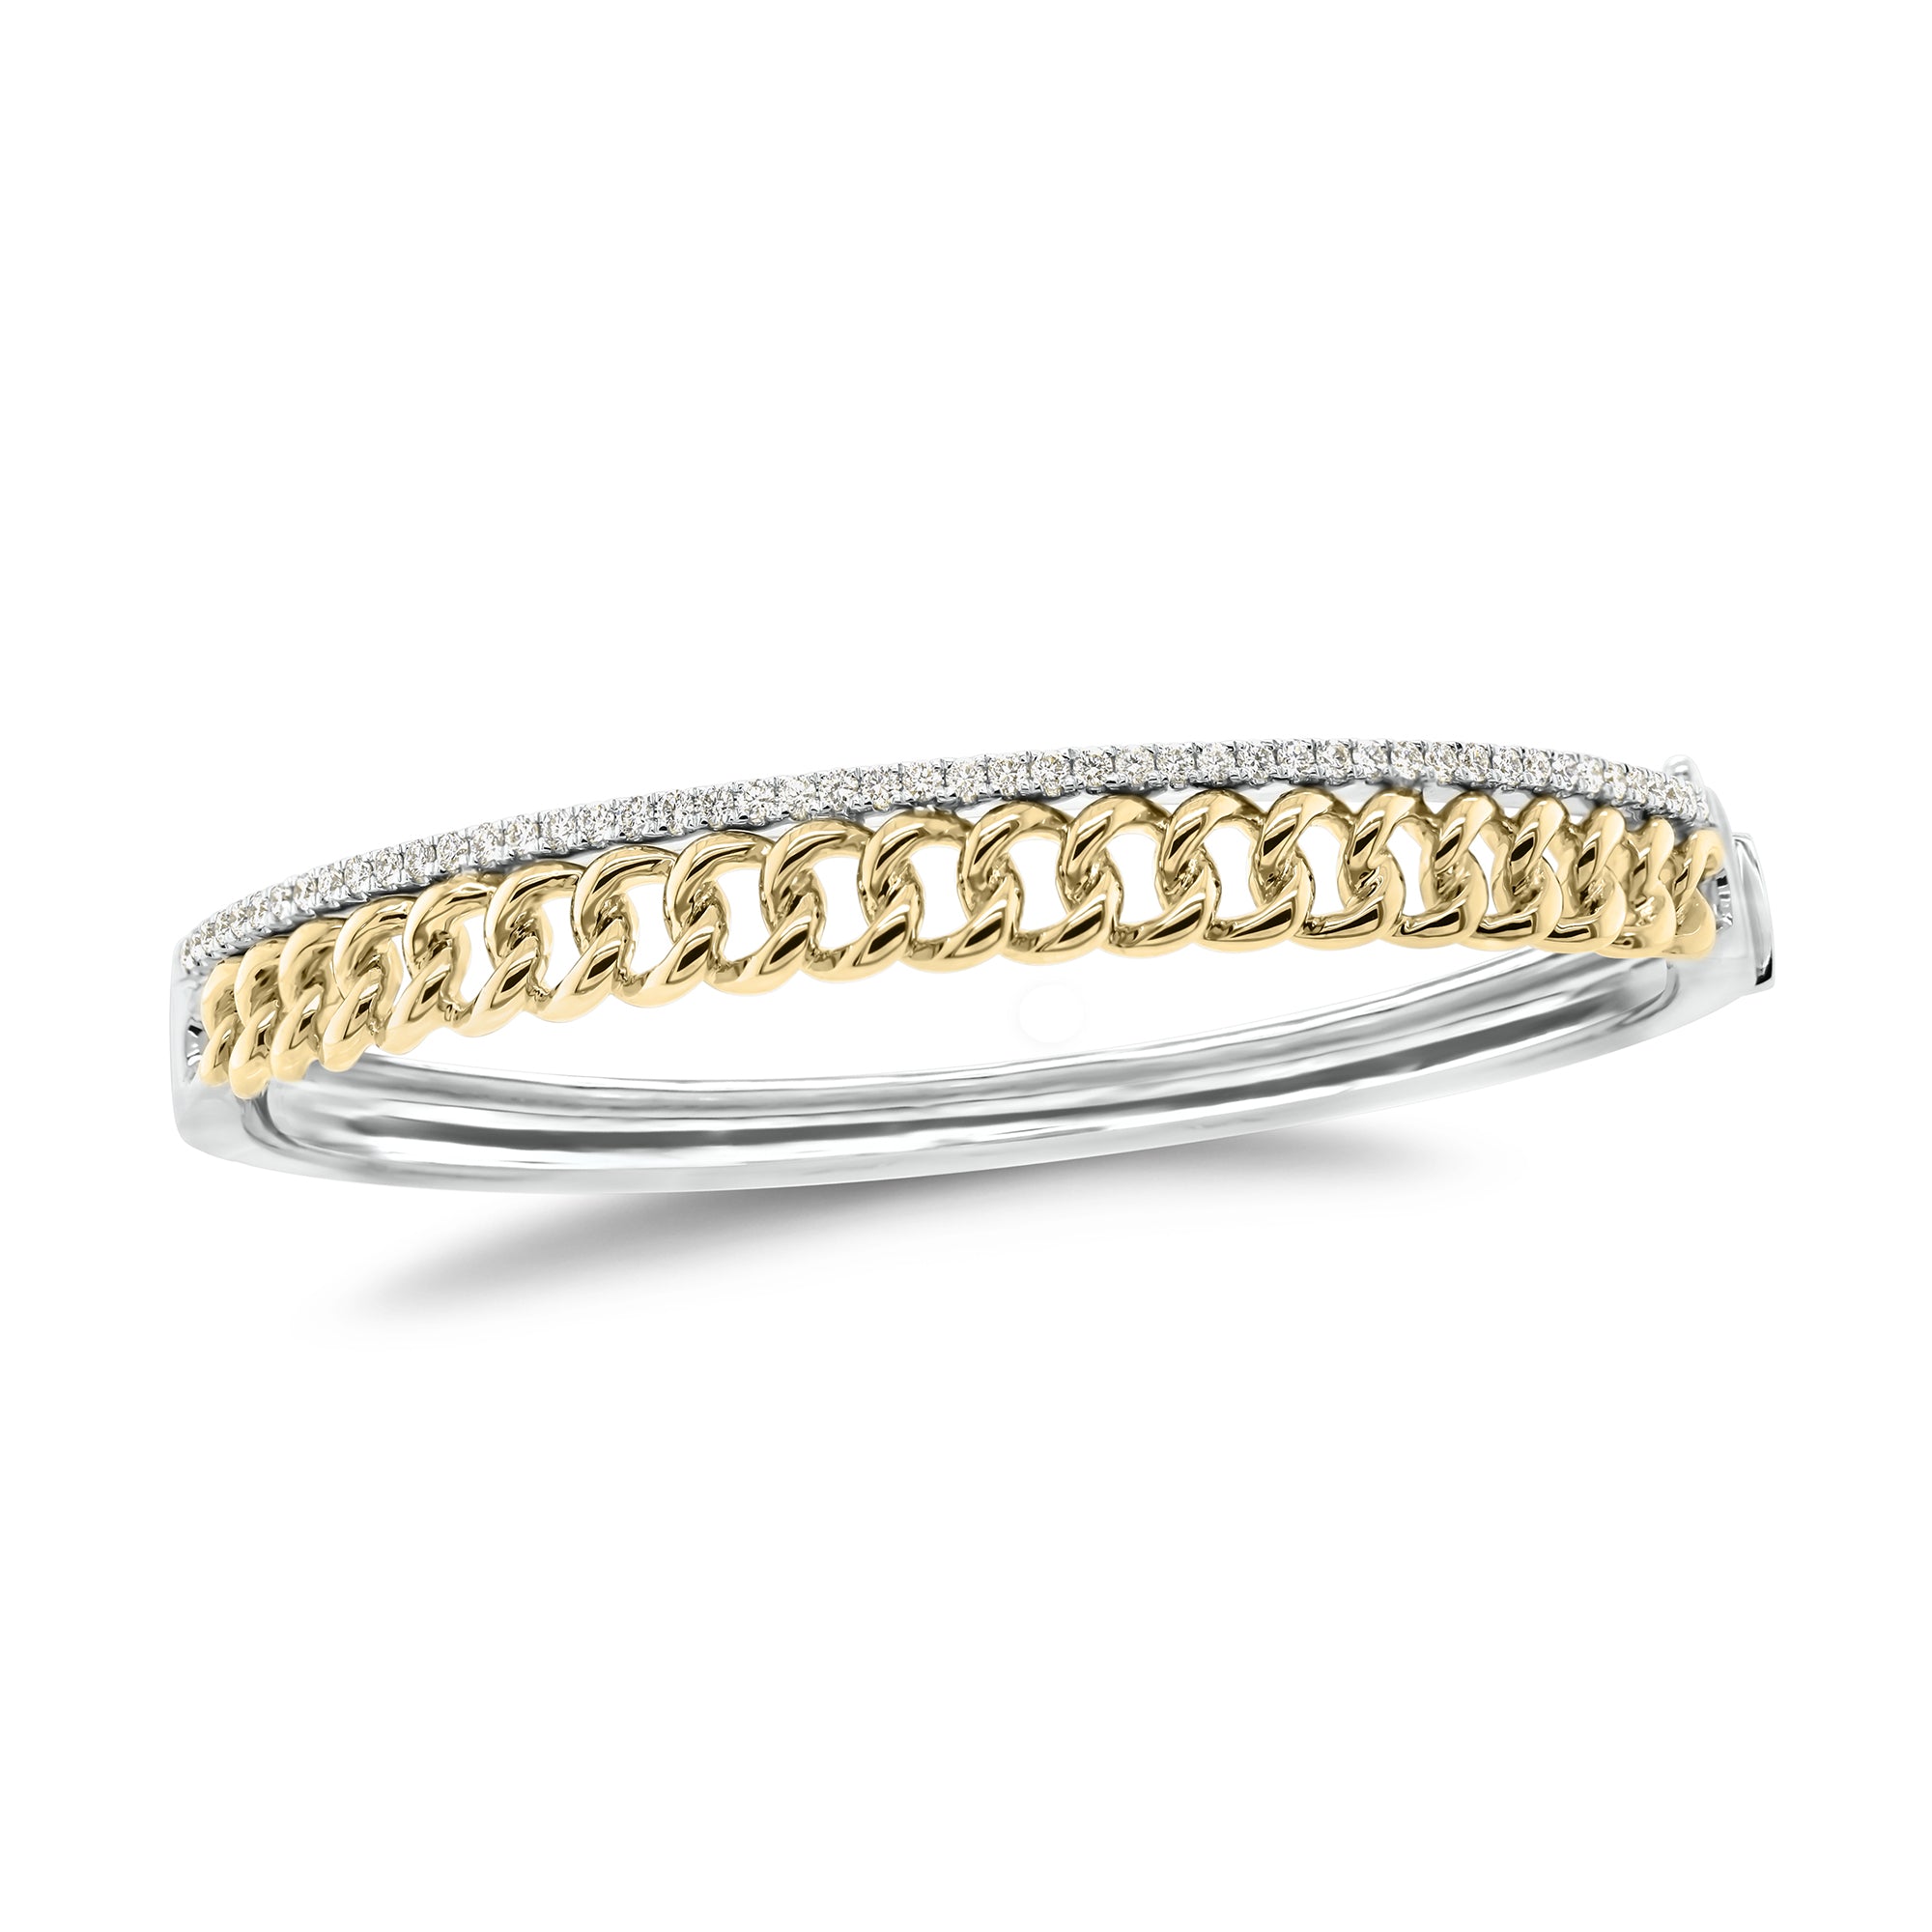 Diamond Two-Tone Curb Chain Bangle Bracelet - 14K yellow gold weighing 20.52 grams - 49 round diamonds totaling 0.48 carats